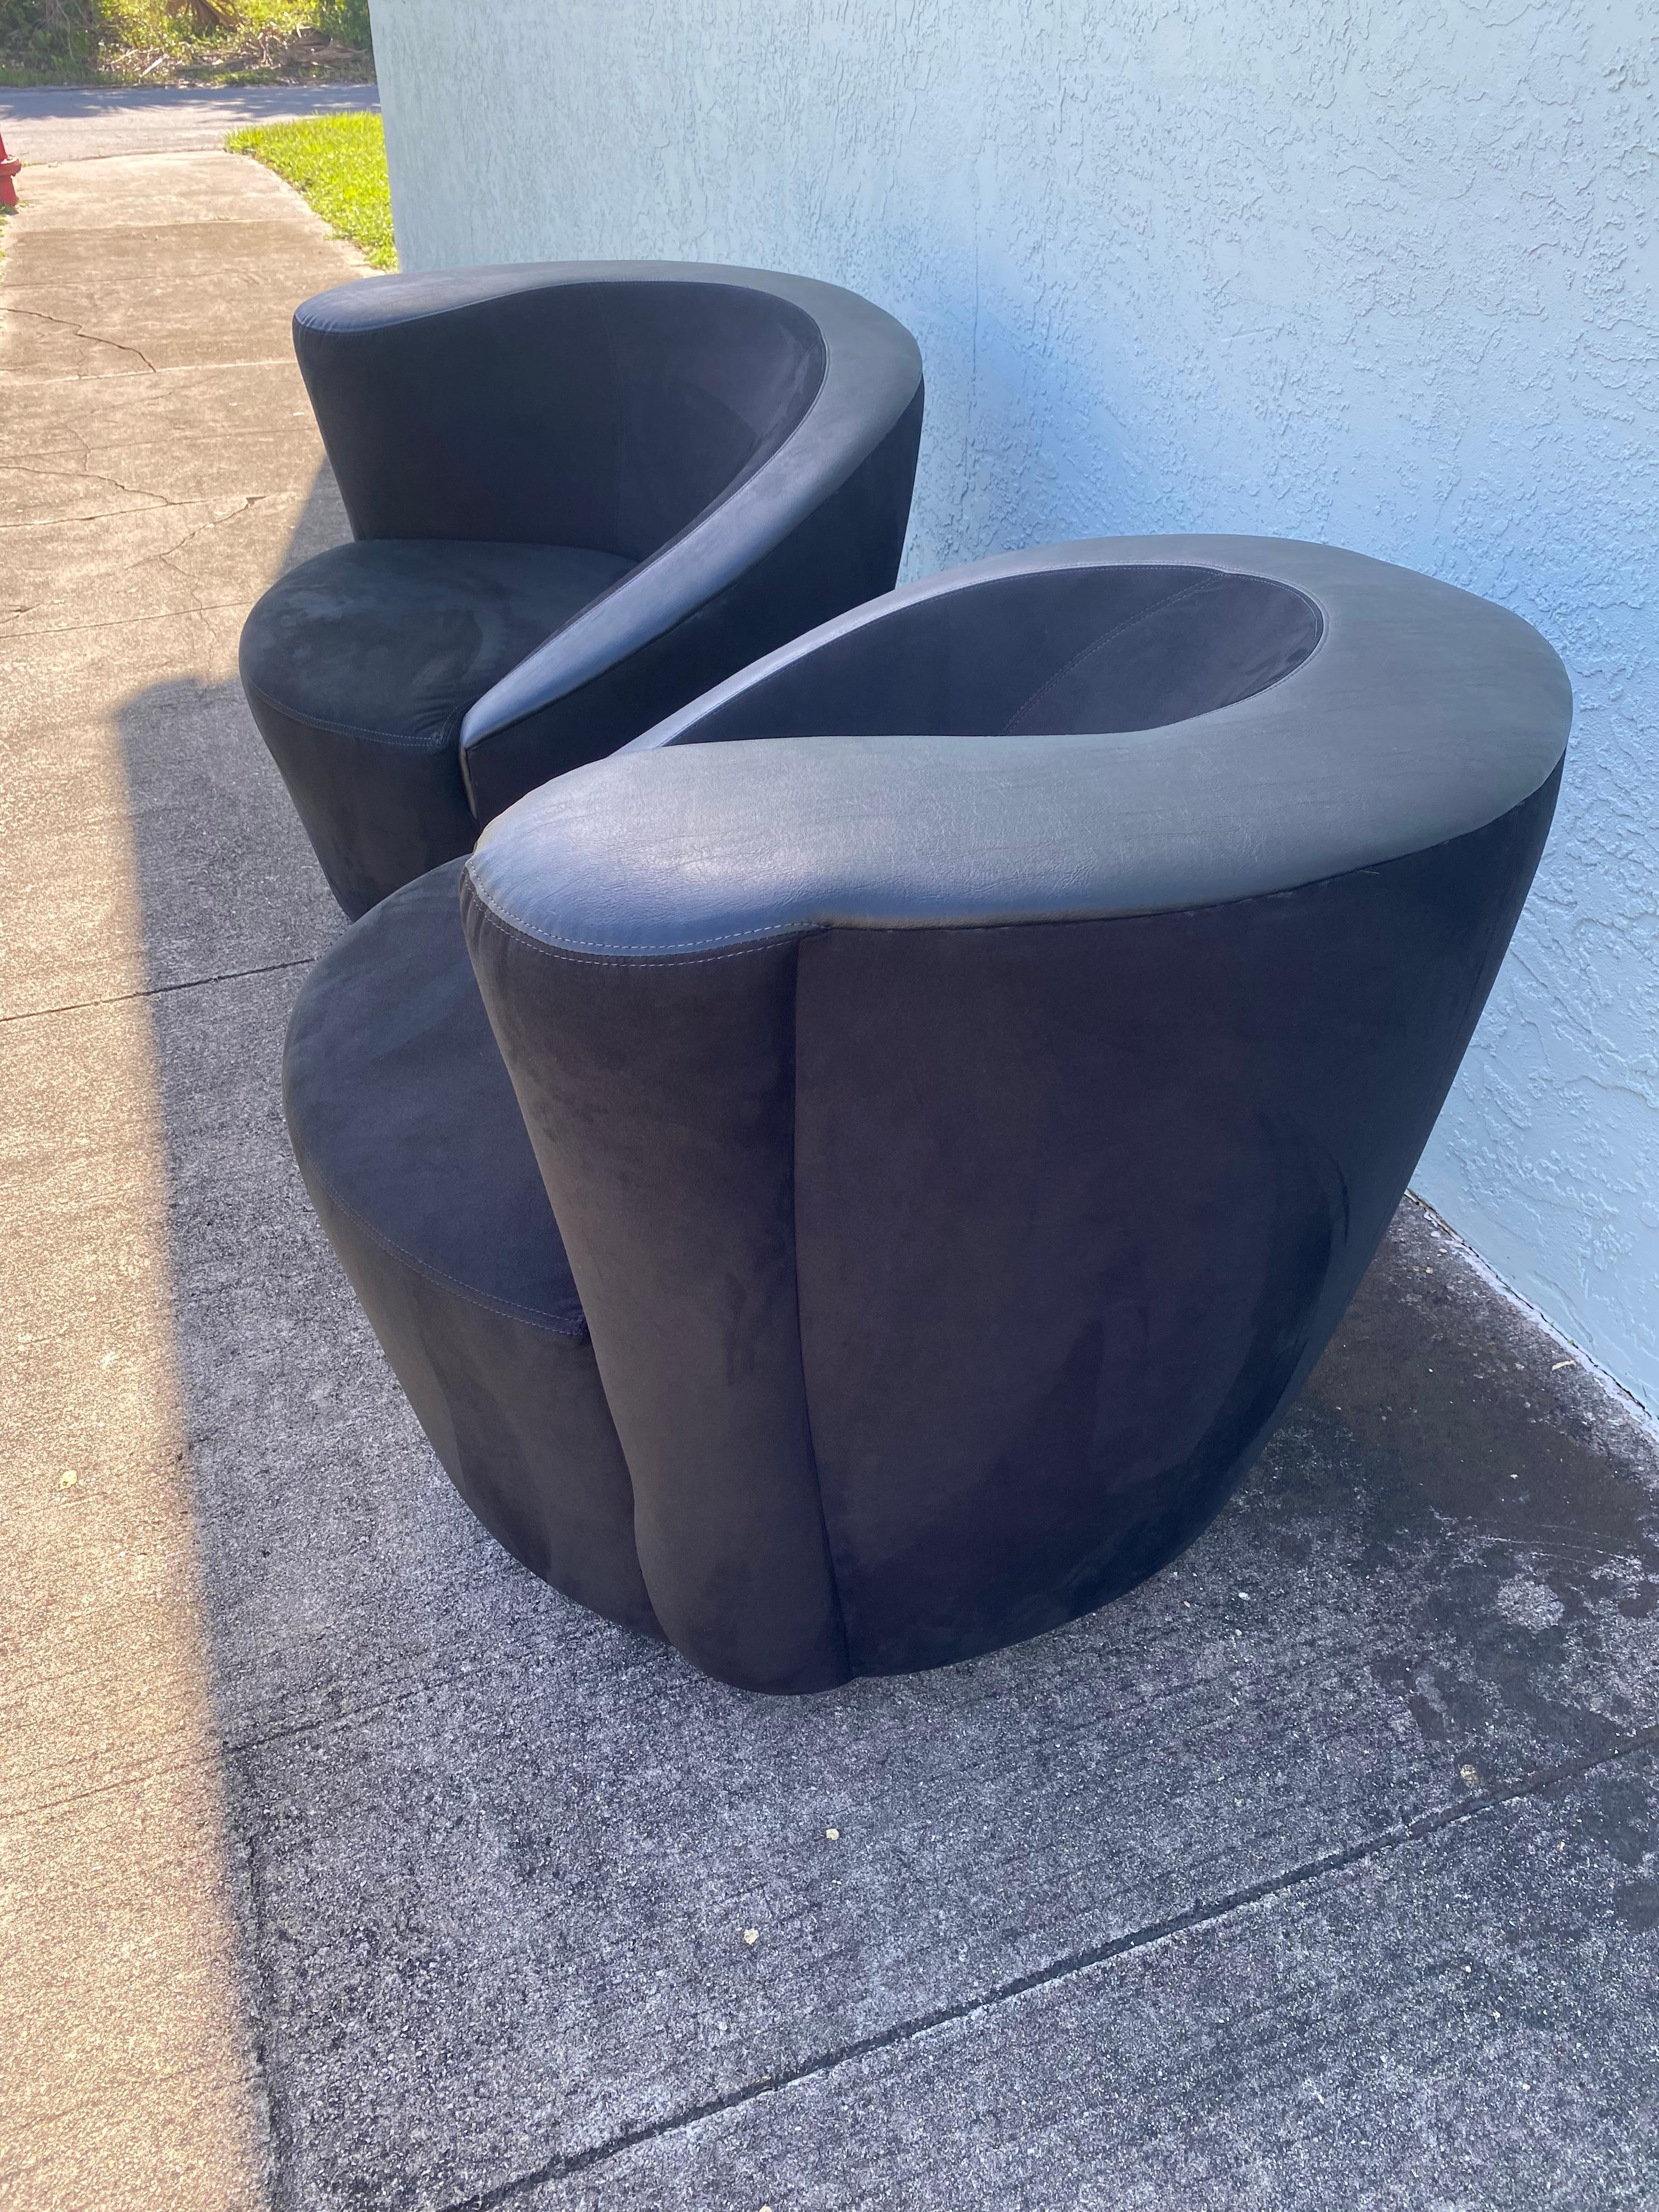 1980s Directional Kagan Black Microsuede and Leather Swivel Chairs, Set of 2 For Sale 3